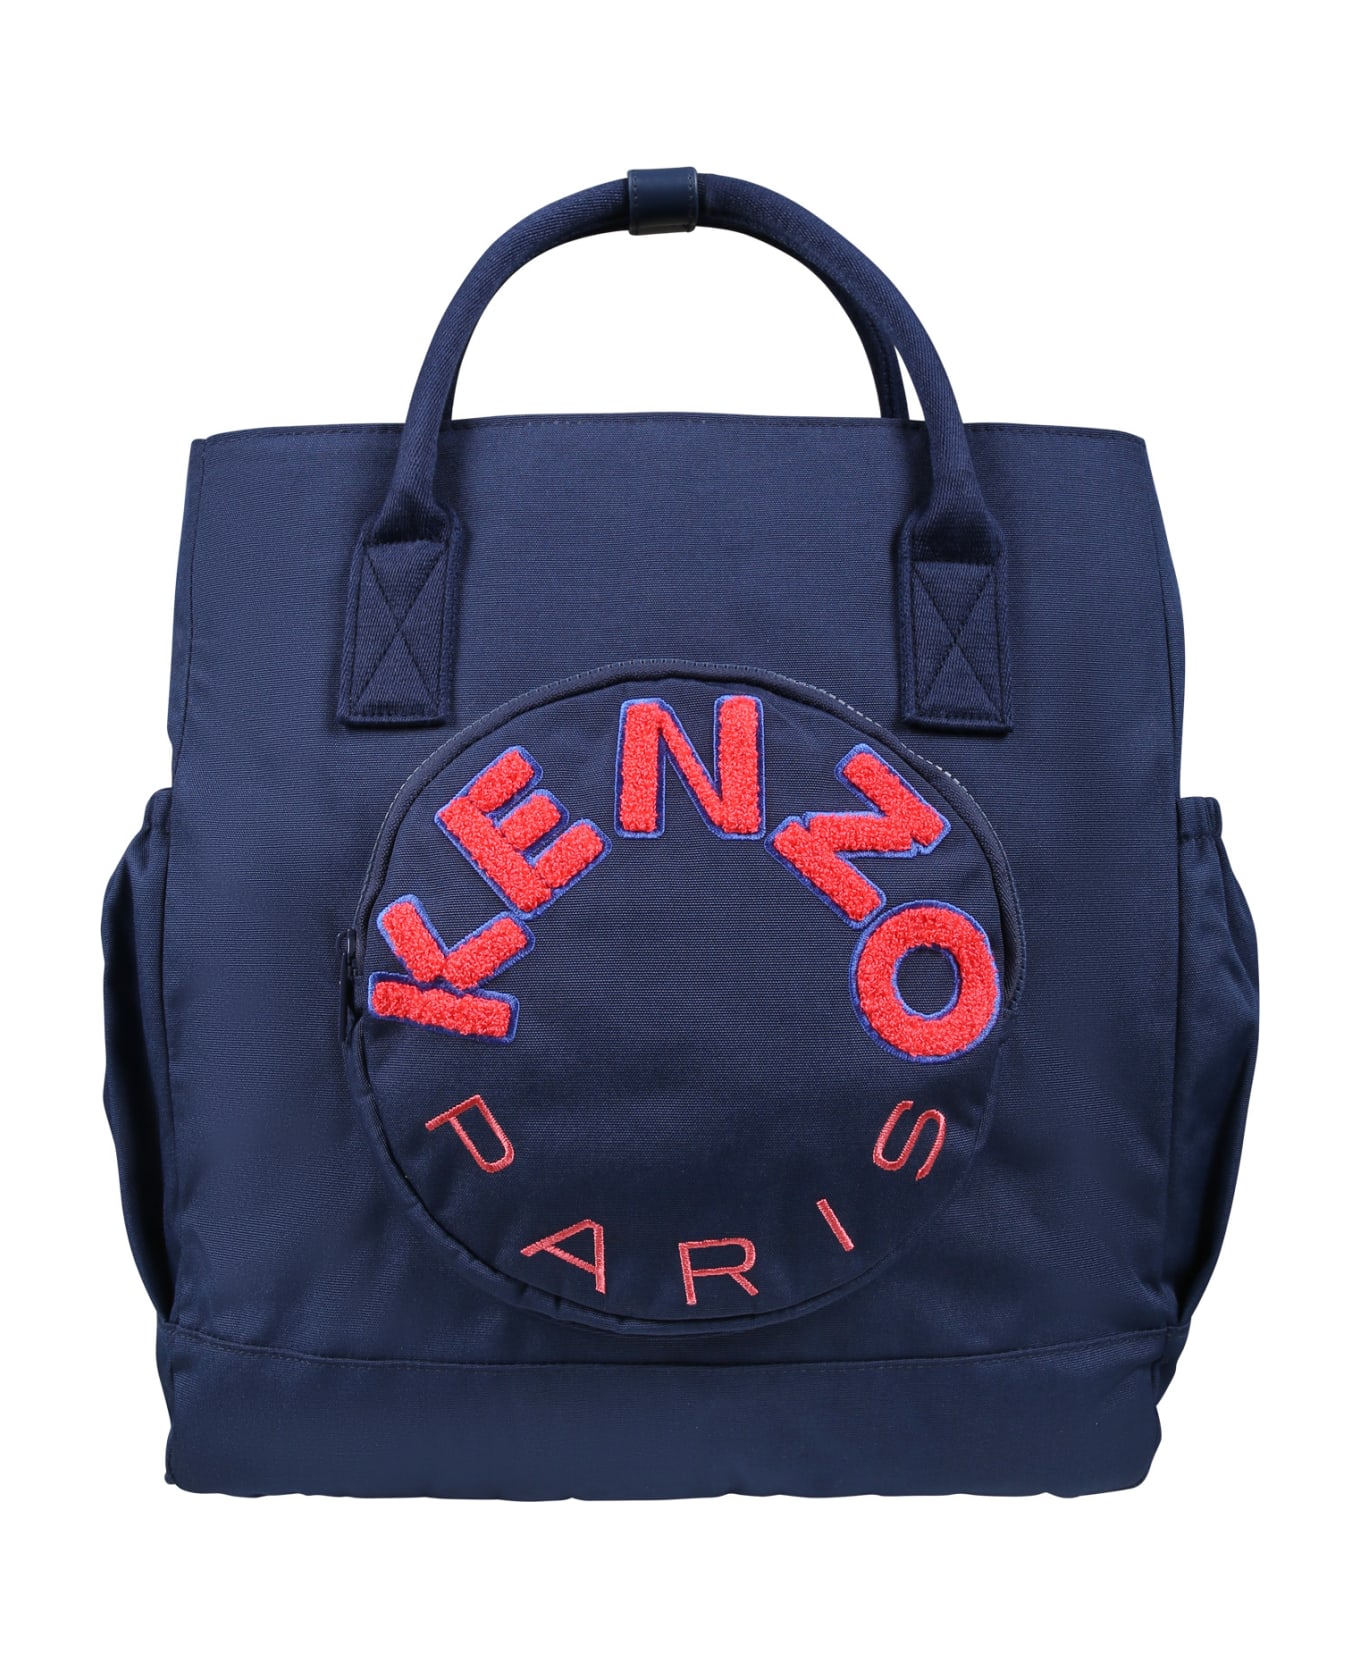 Kenzo Kids Blue Mother Bag For Baby Boy With Logo - Blue